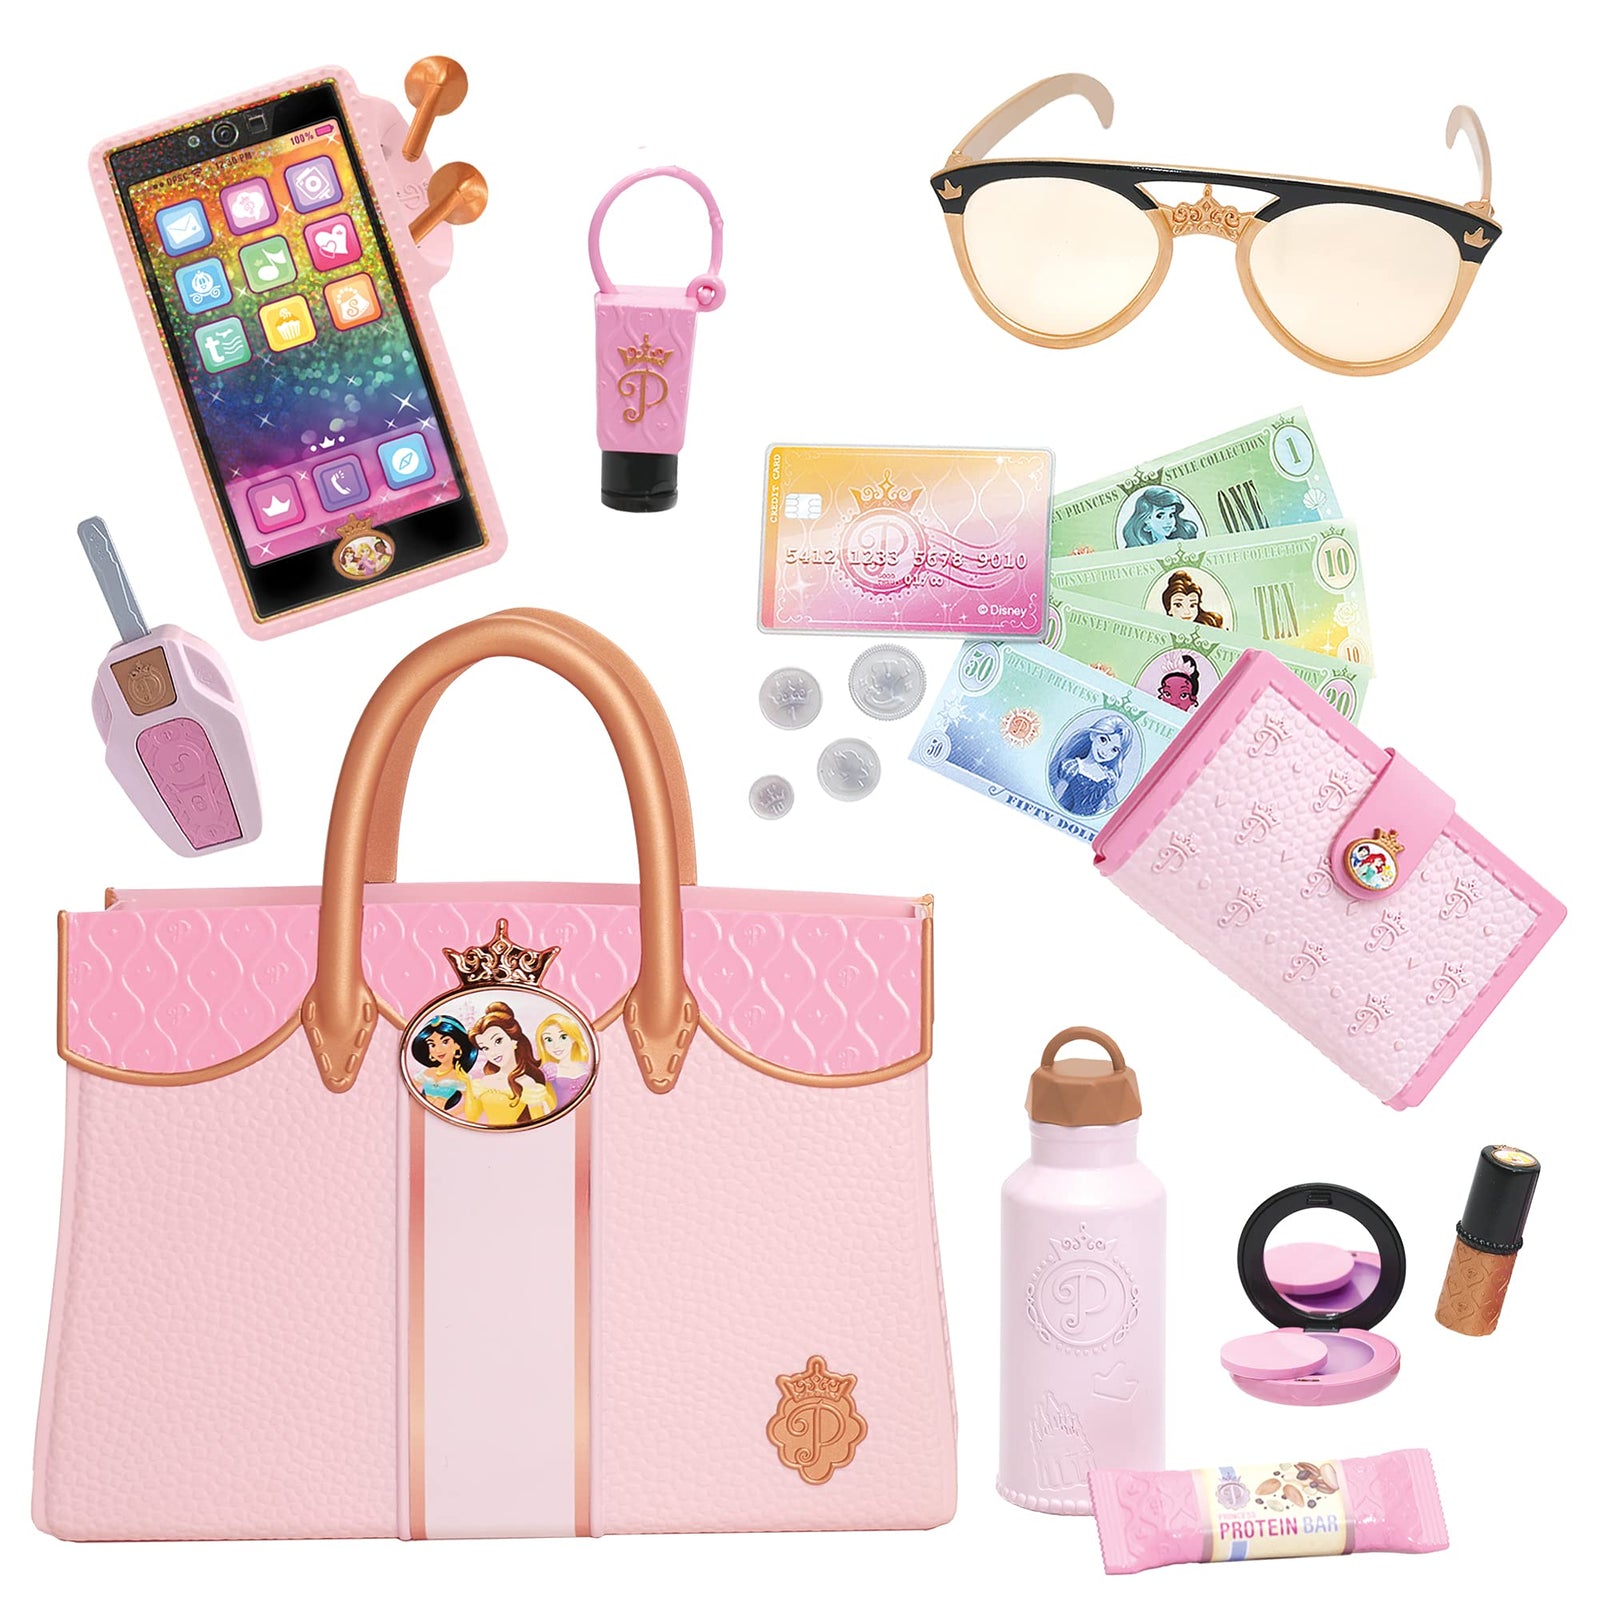 Disney Princess Style Collection Deluxe Tote Bag & Essentials [Amazon Exclusive]